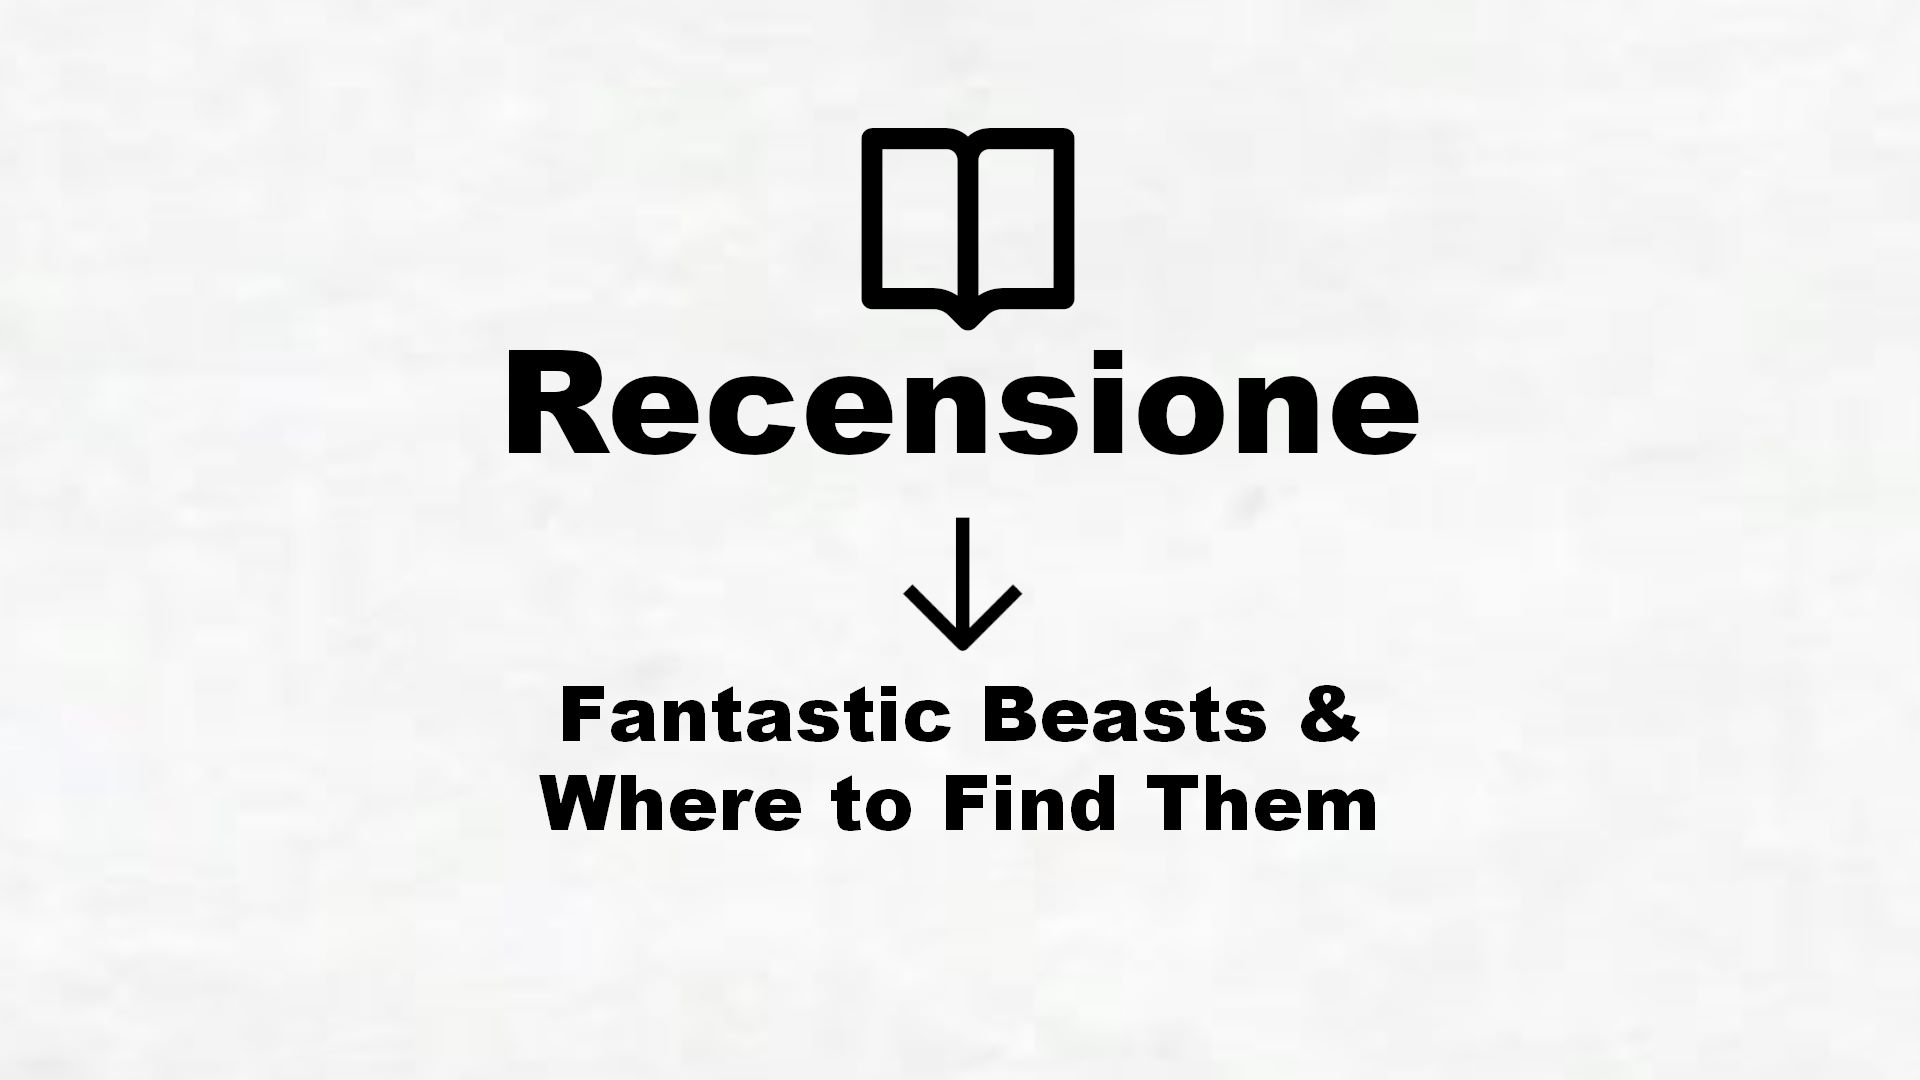 Fantastic Beasts & Where to Find Them – Recensione Libro